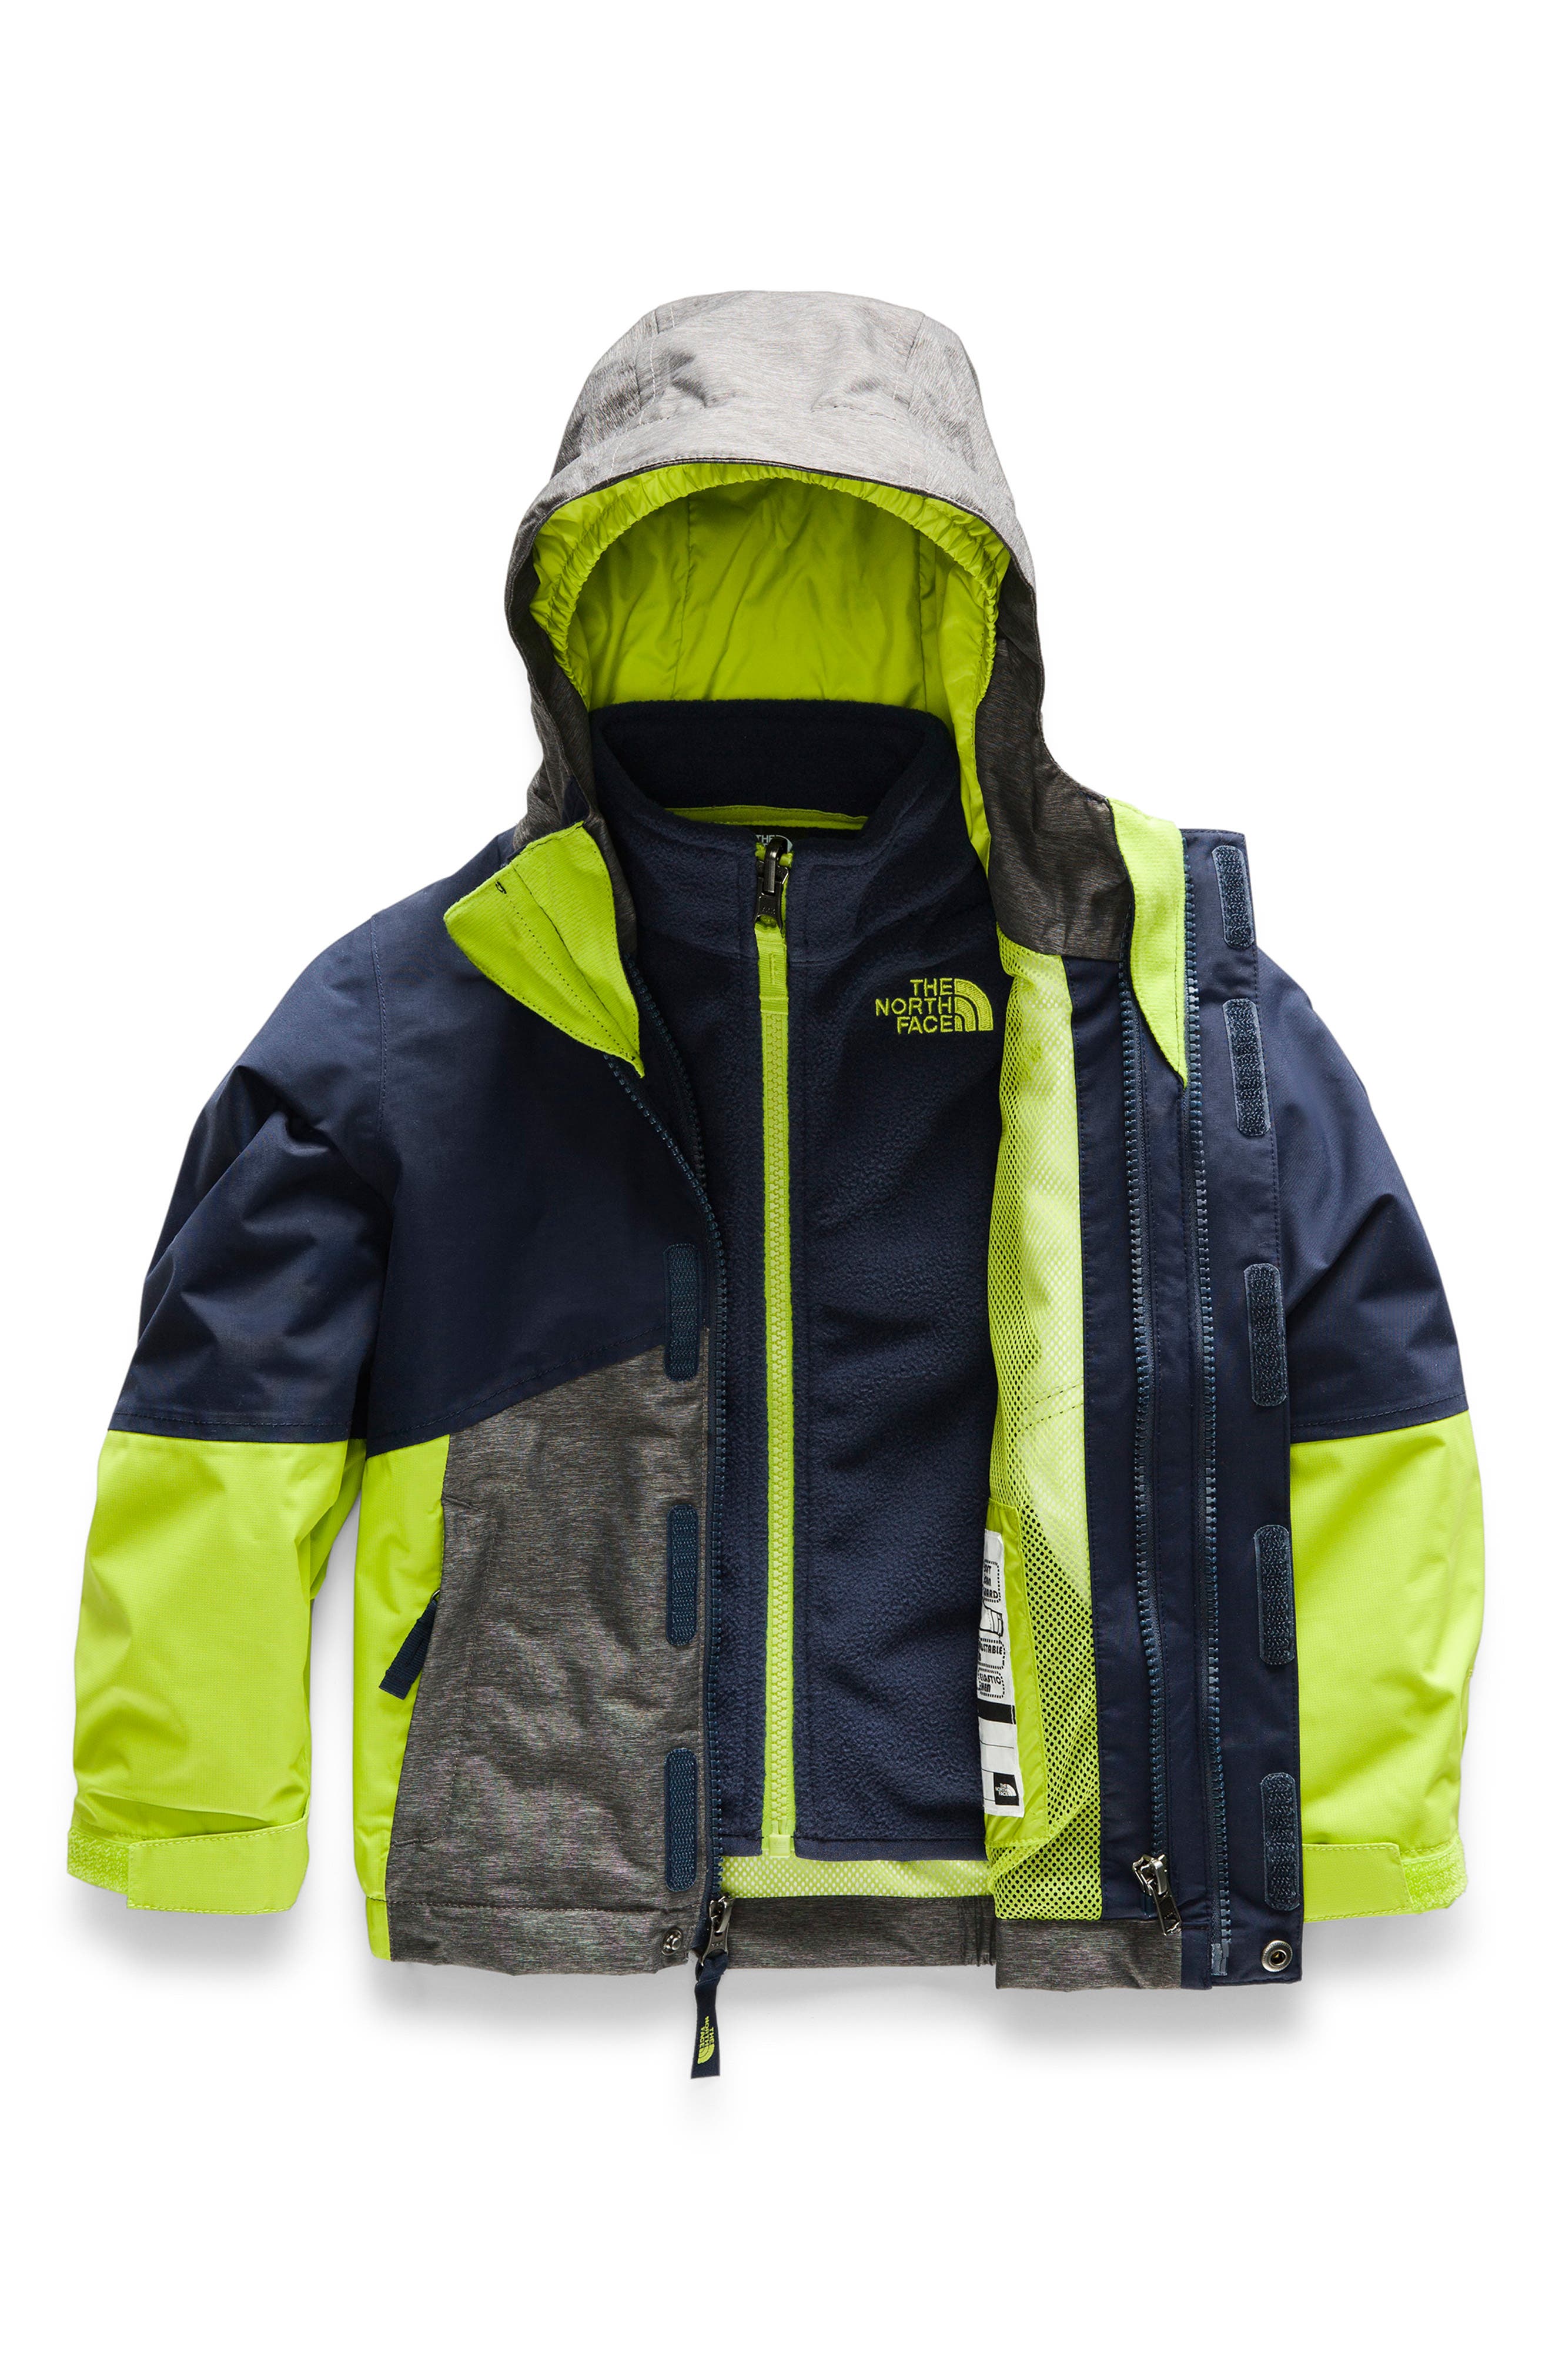 north face 3 in 1 boys